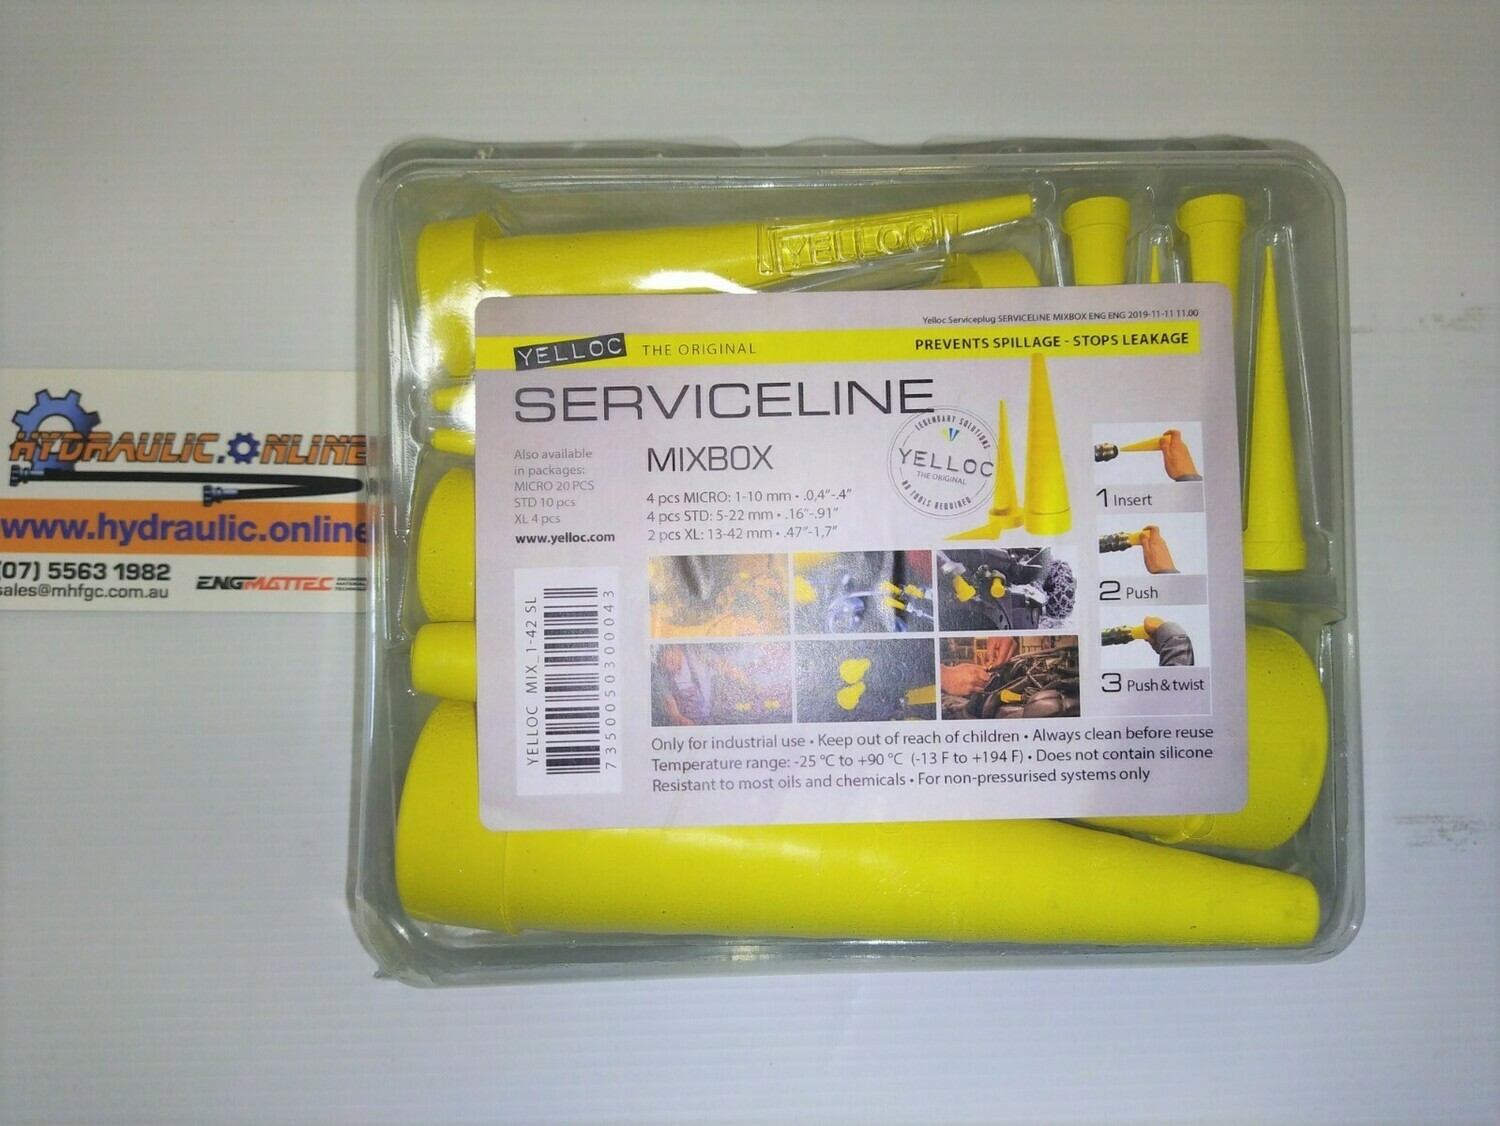 Mixed Box containing 12 pieces of yellow Synthetic Rubber Service plugs capable of temporarily sealing holes leaking oil. box contains,  4 pieces hole size 1 to 10 mm, 4 pieces 5 to 22mm and 2 pieces 13 to 42 mm 